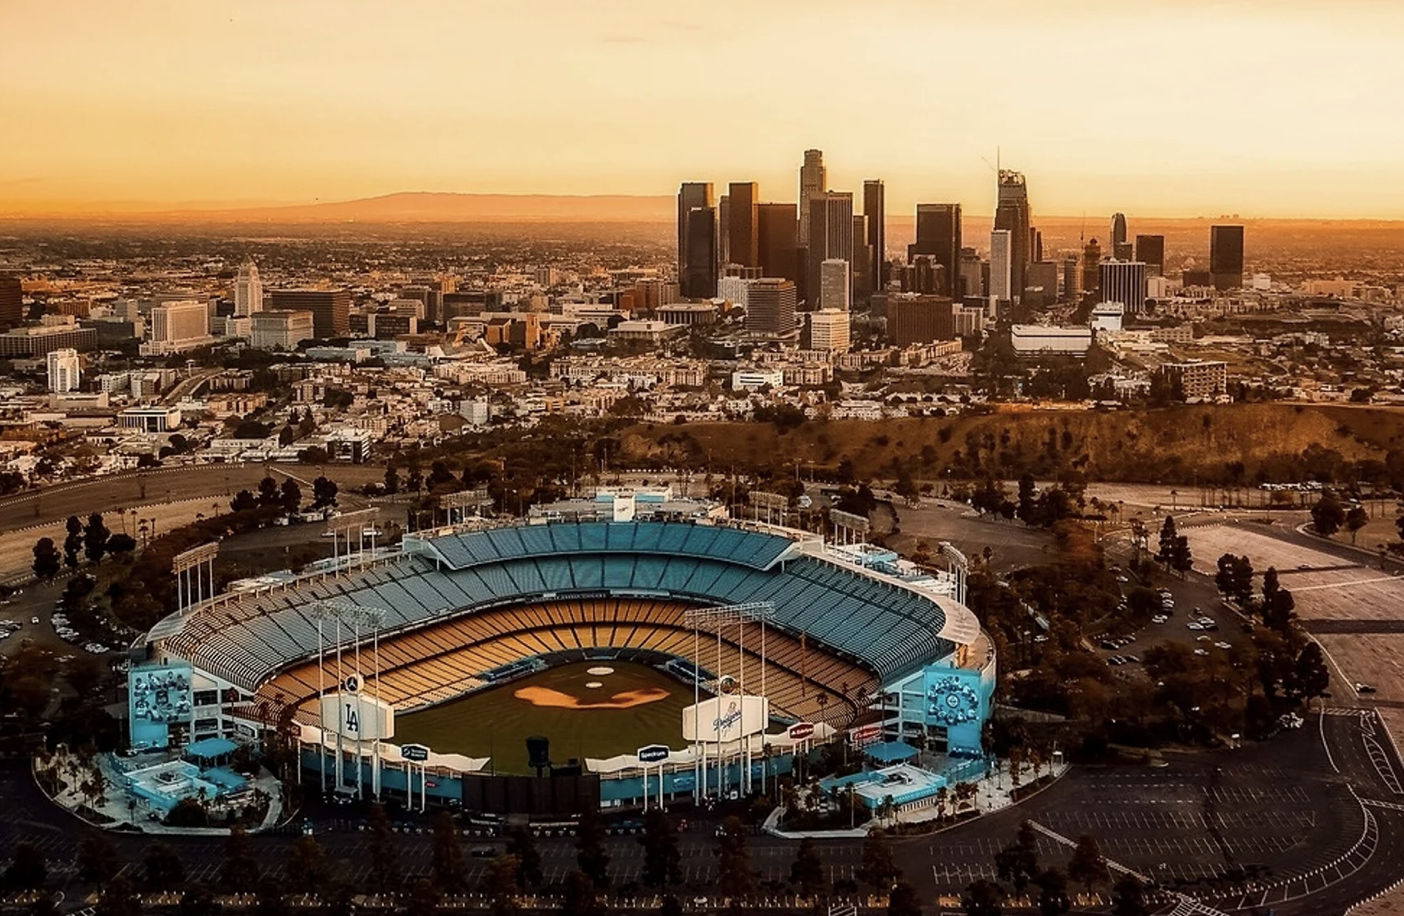 Dodgers stadium approved bag not clear｜TikTok Search